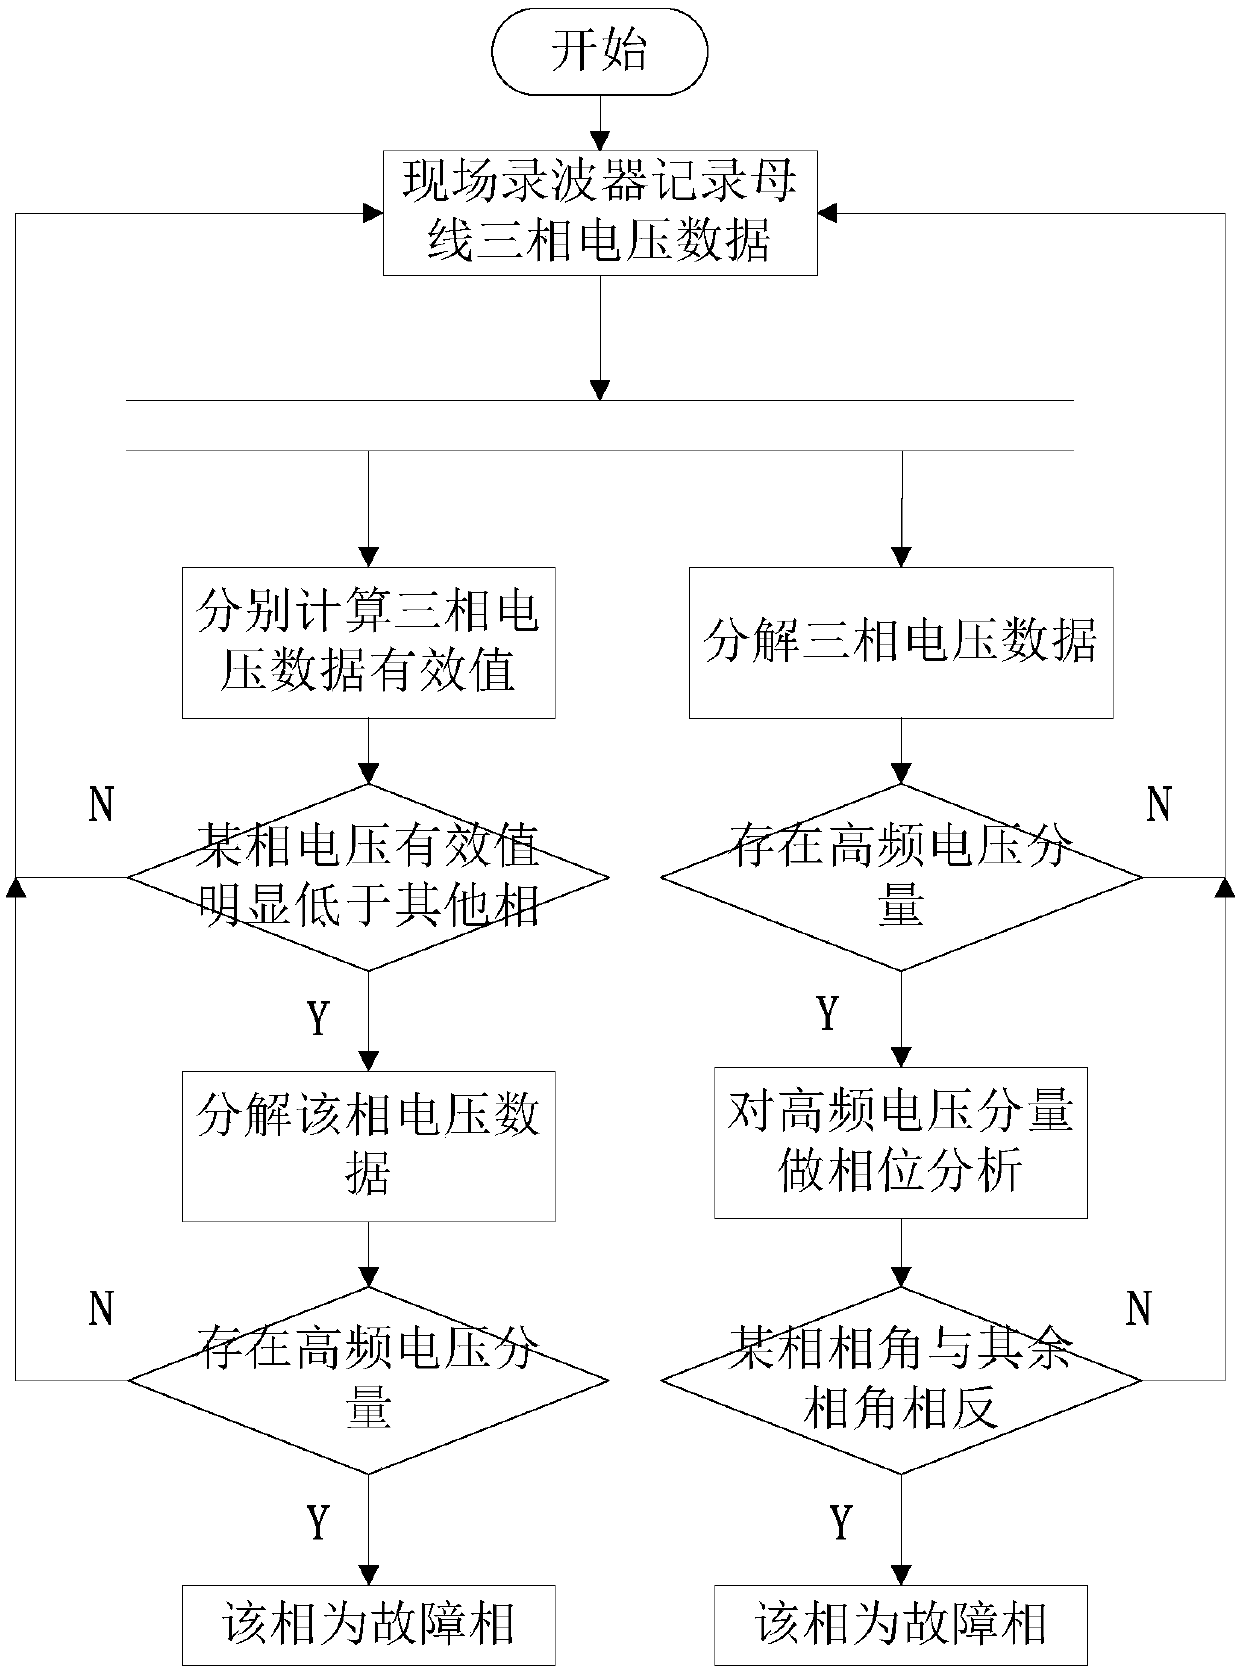 Fault phase determining method of arc extinguishing cabinet based on transient high-frequency component